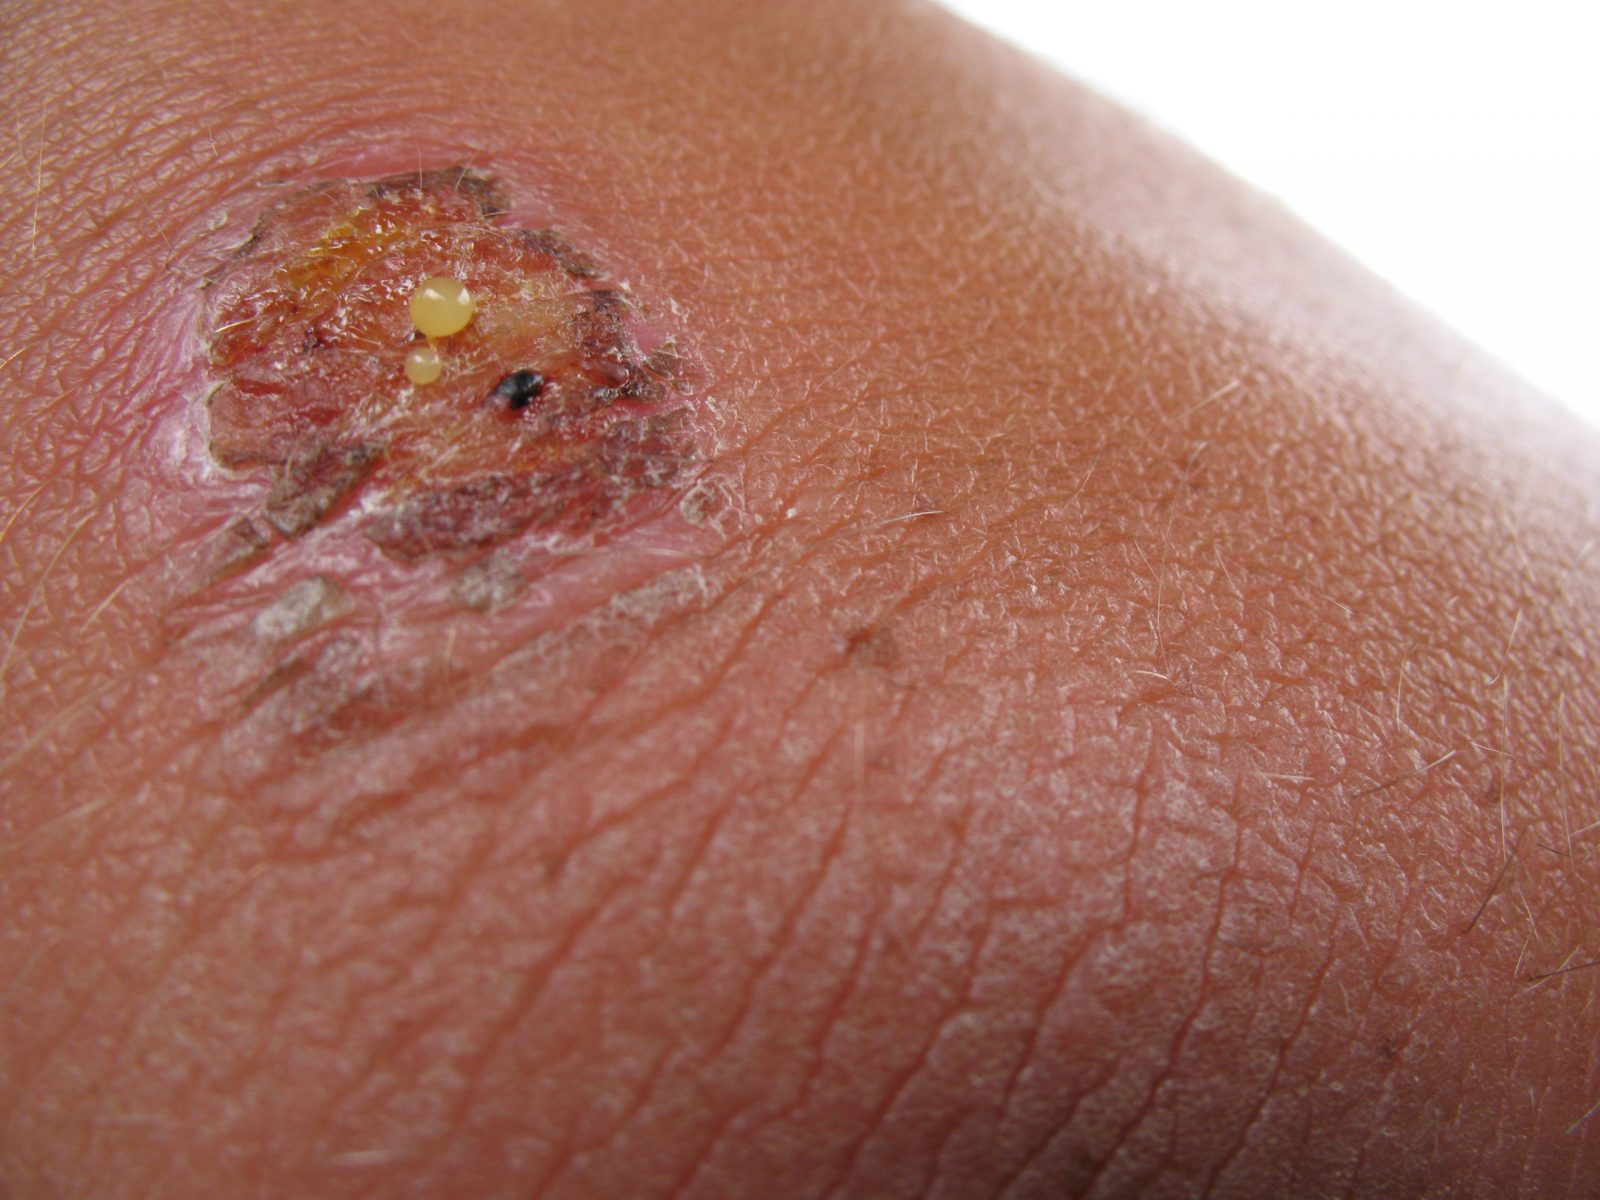 Essential Signs of an Infected Wound